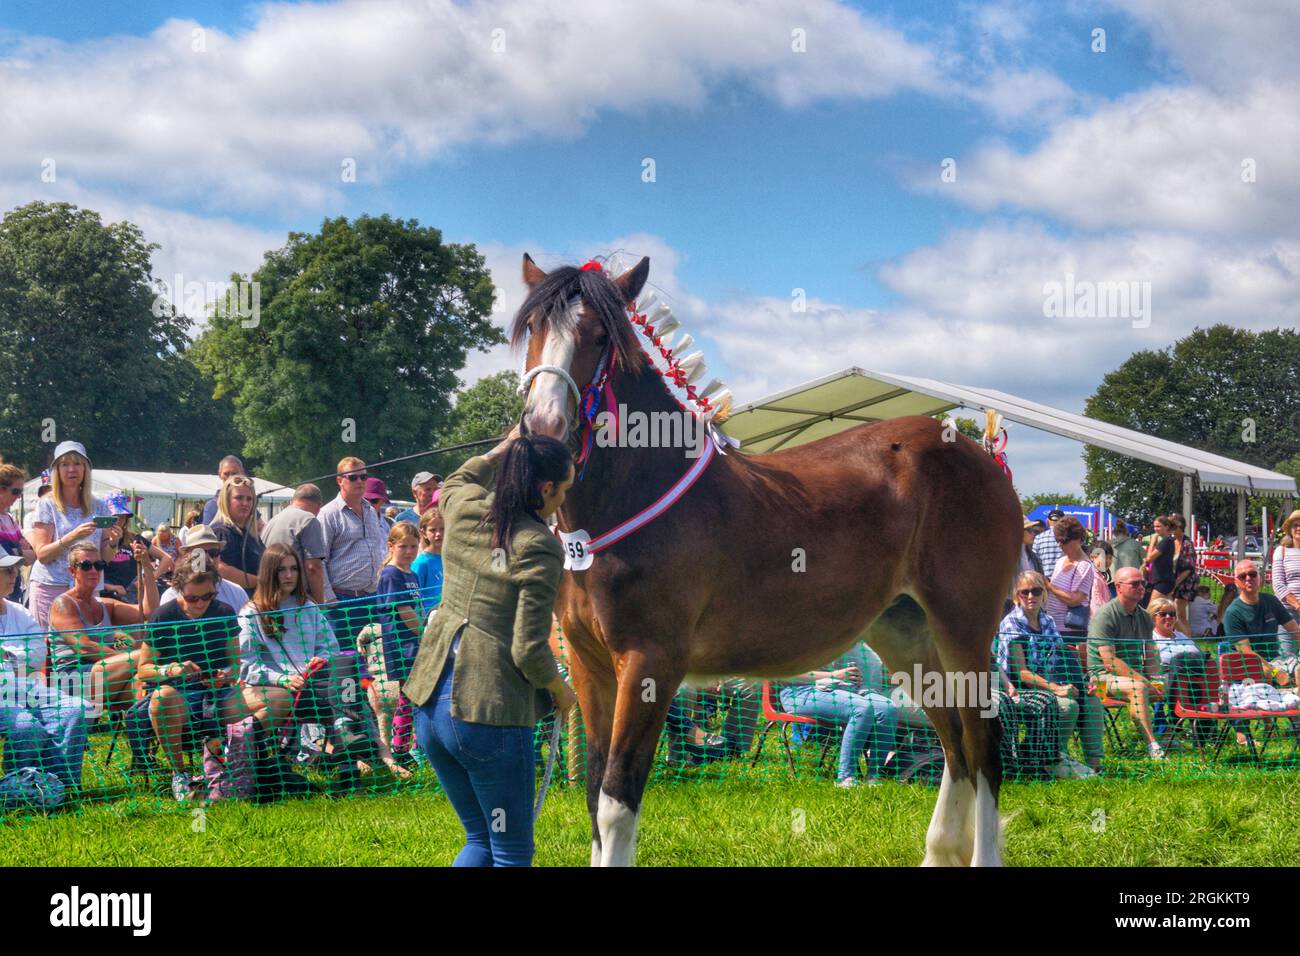 The art of horse control and showmanship. Stock Photo